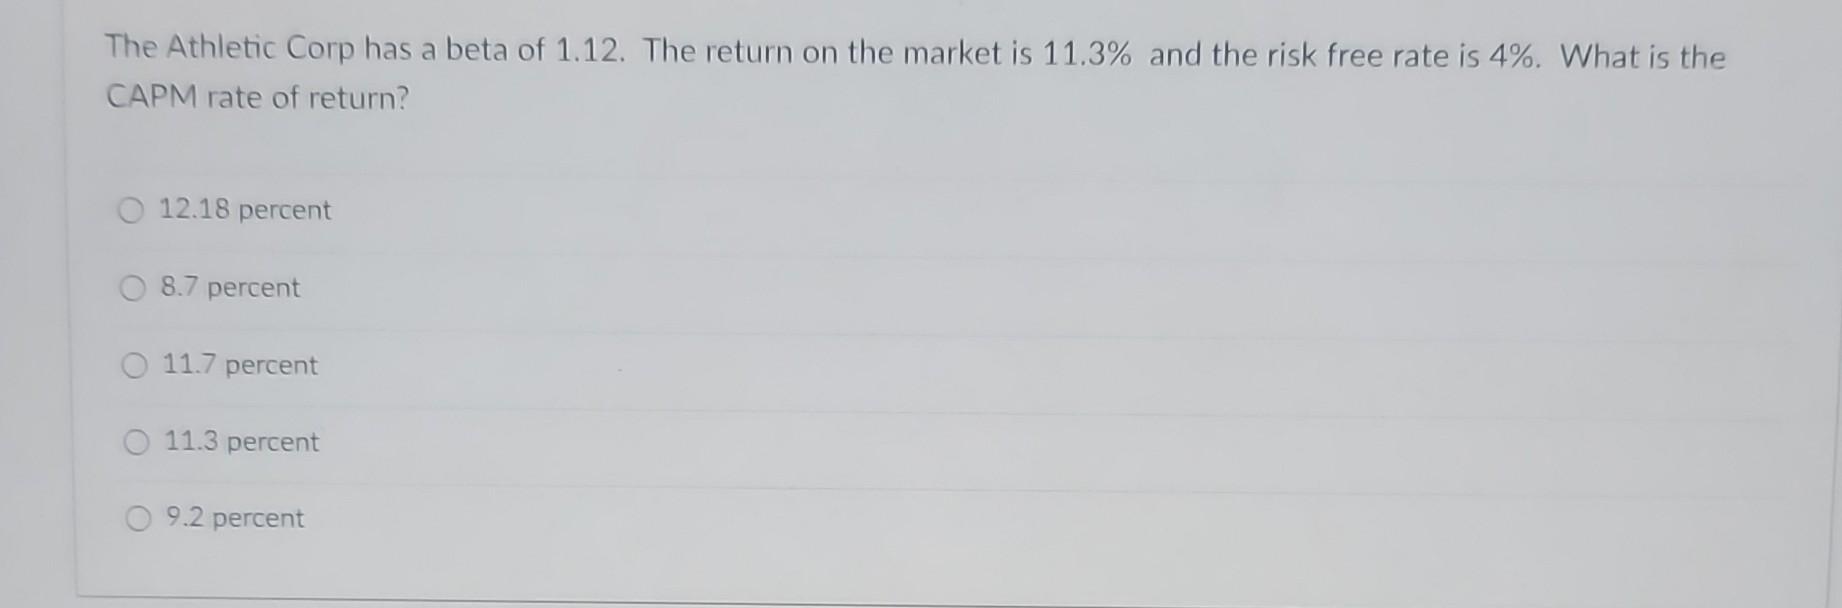 The Athletic Corp has a beta of 1.12. The return on the market is 11.3% and the risk free rate is 4%. What is